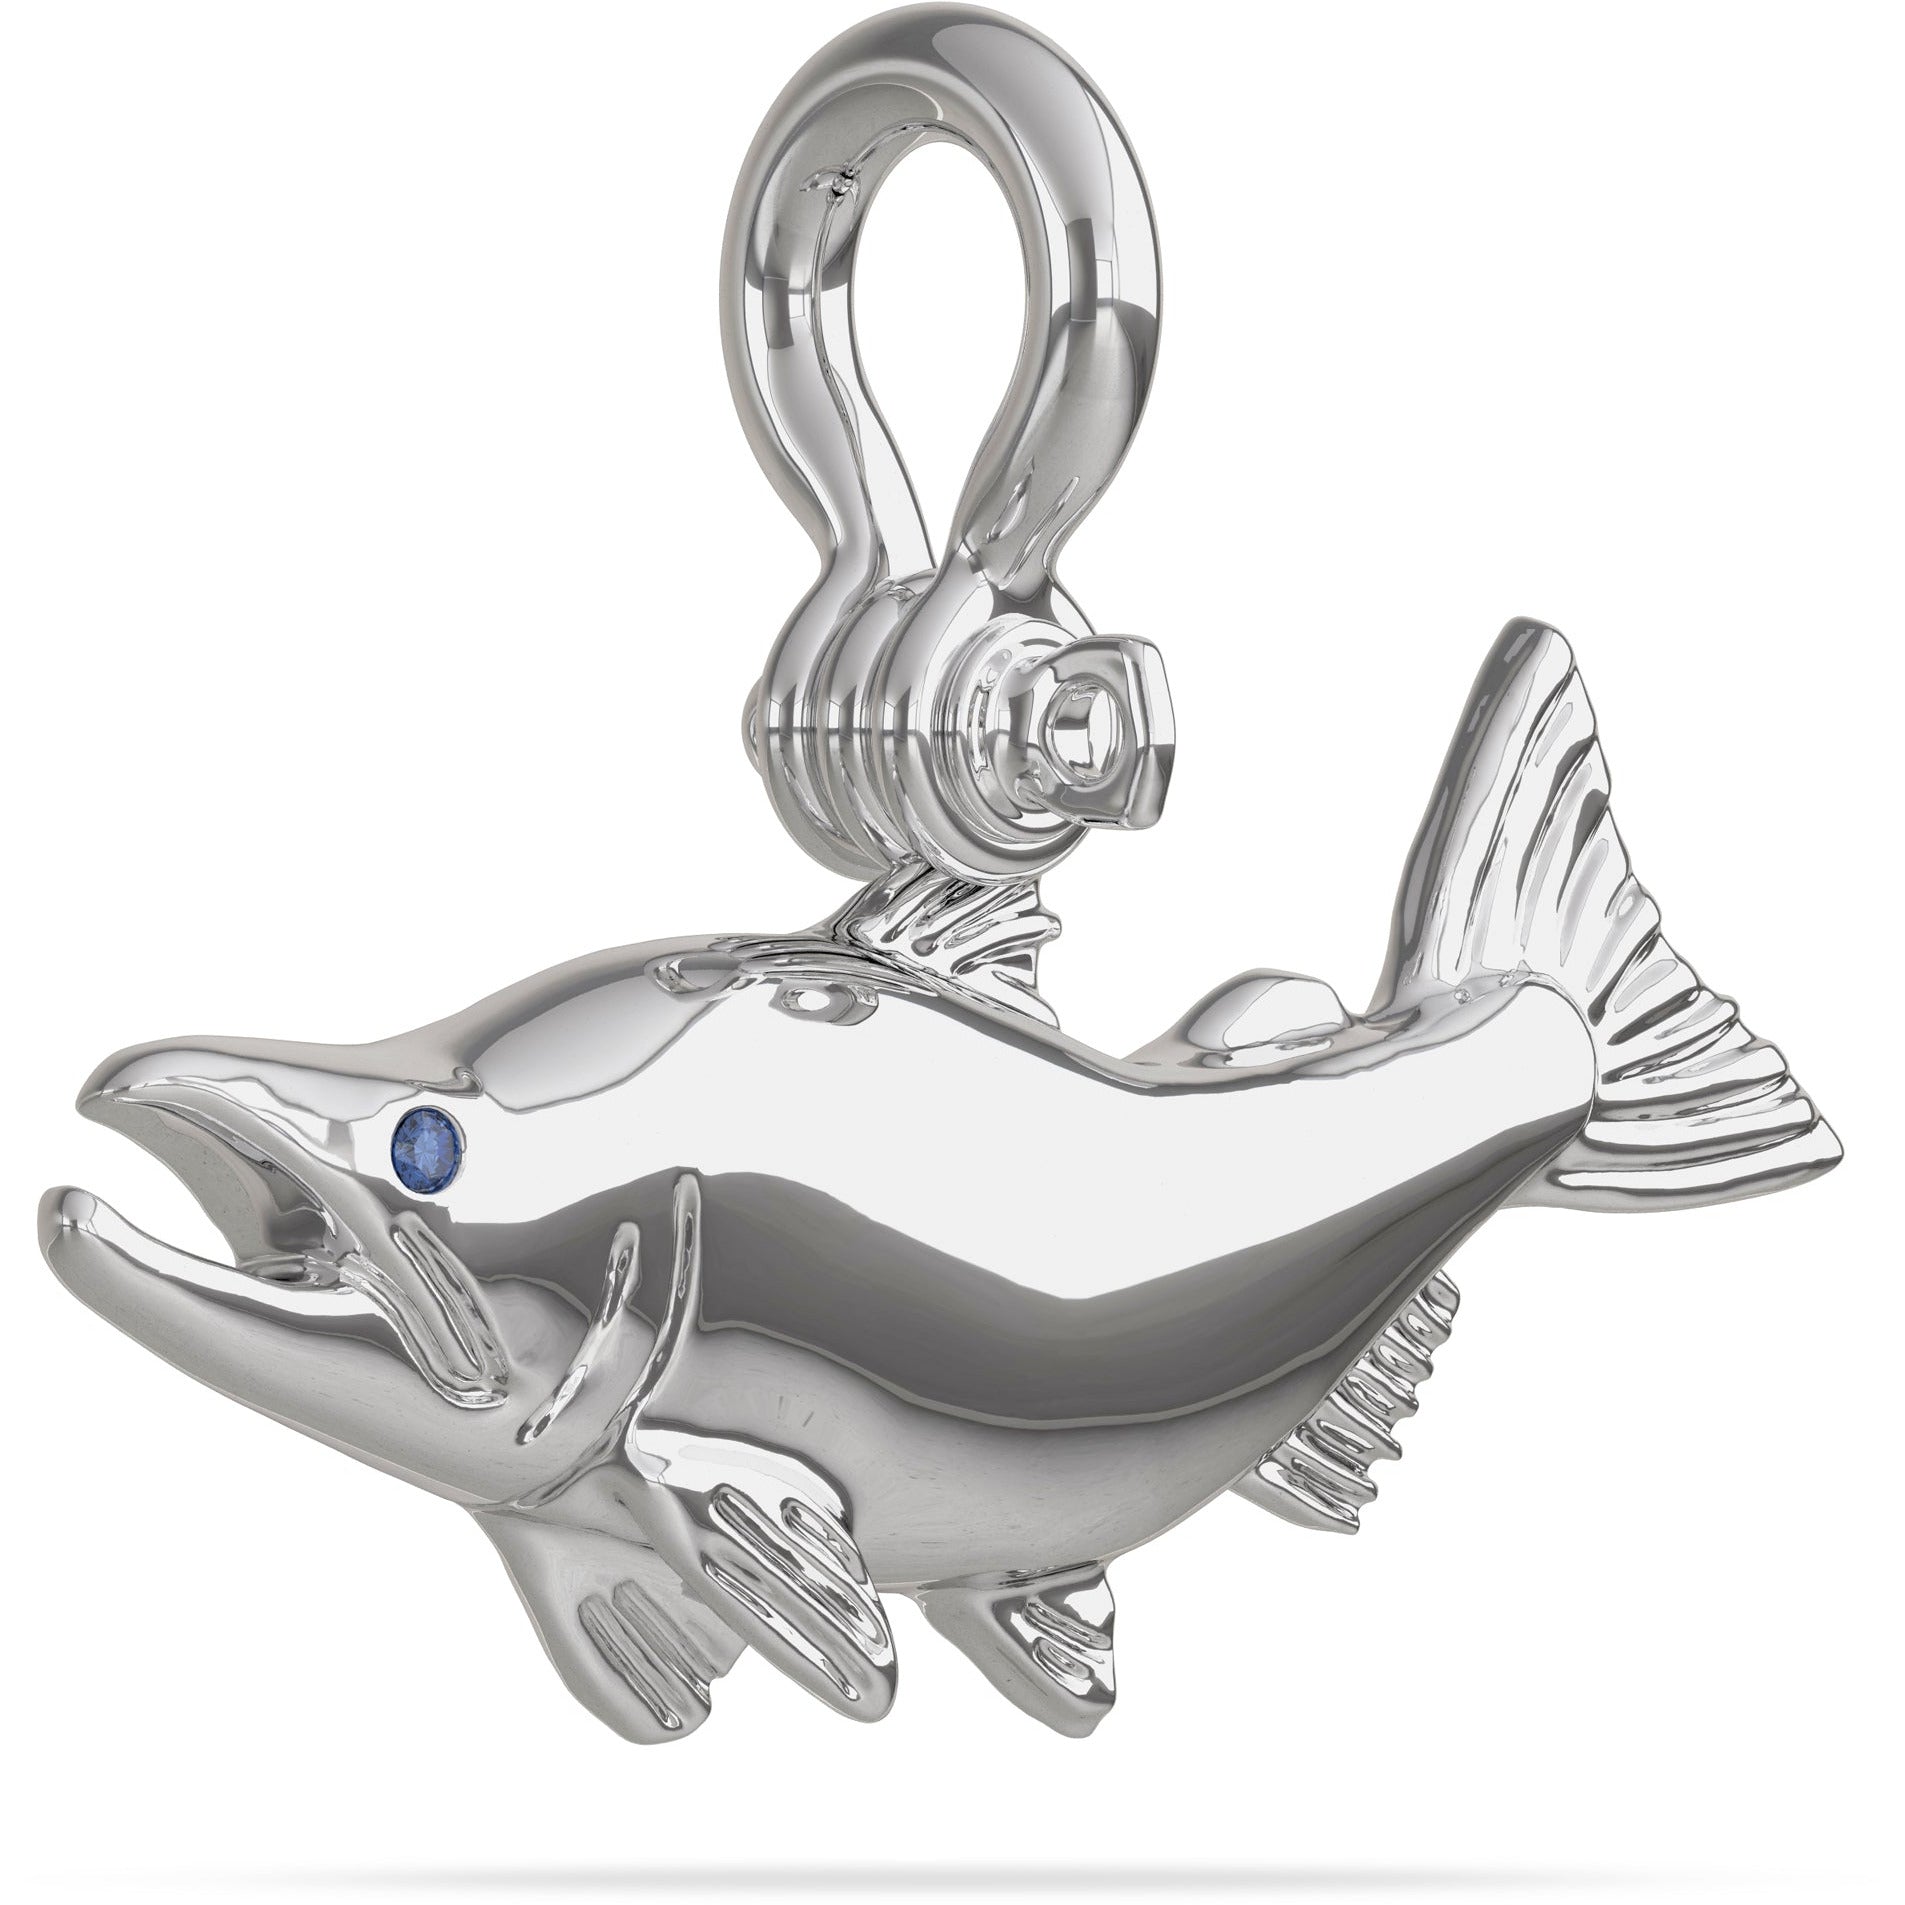 Sterling Silver Sockeye Salmon  Pendant High Polished Mirror Finish With Blue Sapphire Eye with A Mariner Shackle Bail Custom Designed By Nautical Treasure Jewelry In The Florida Keys Fly Fishing